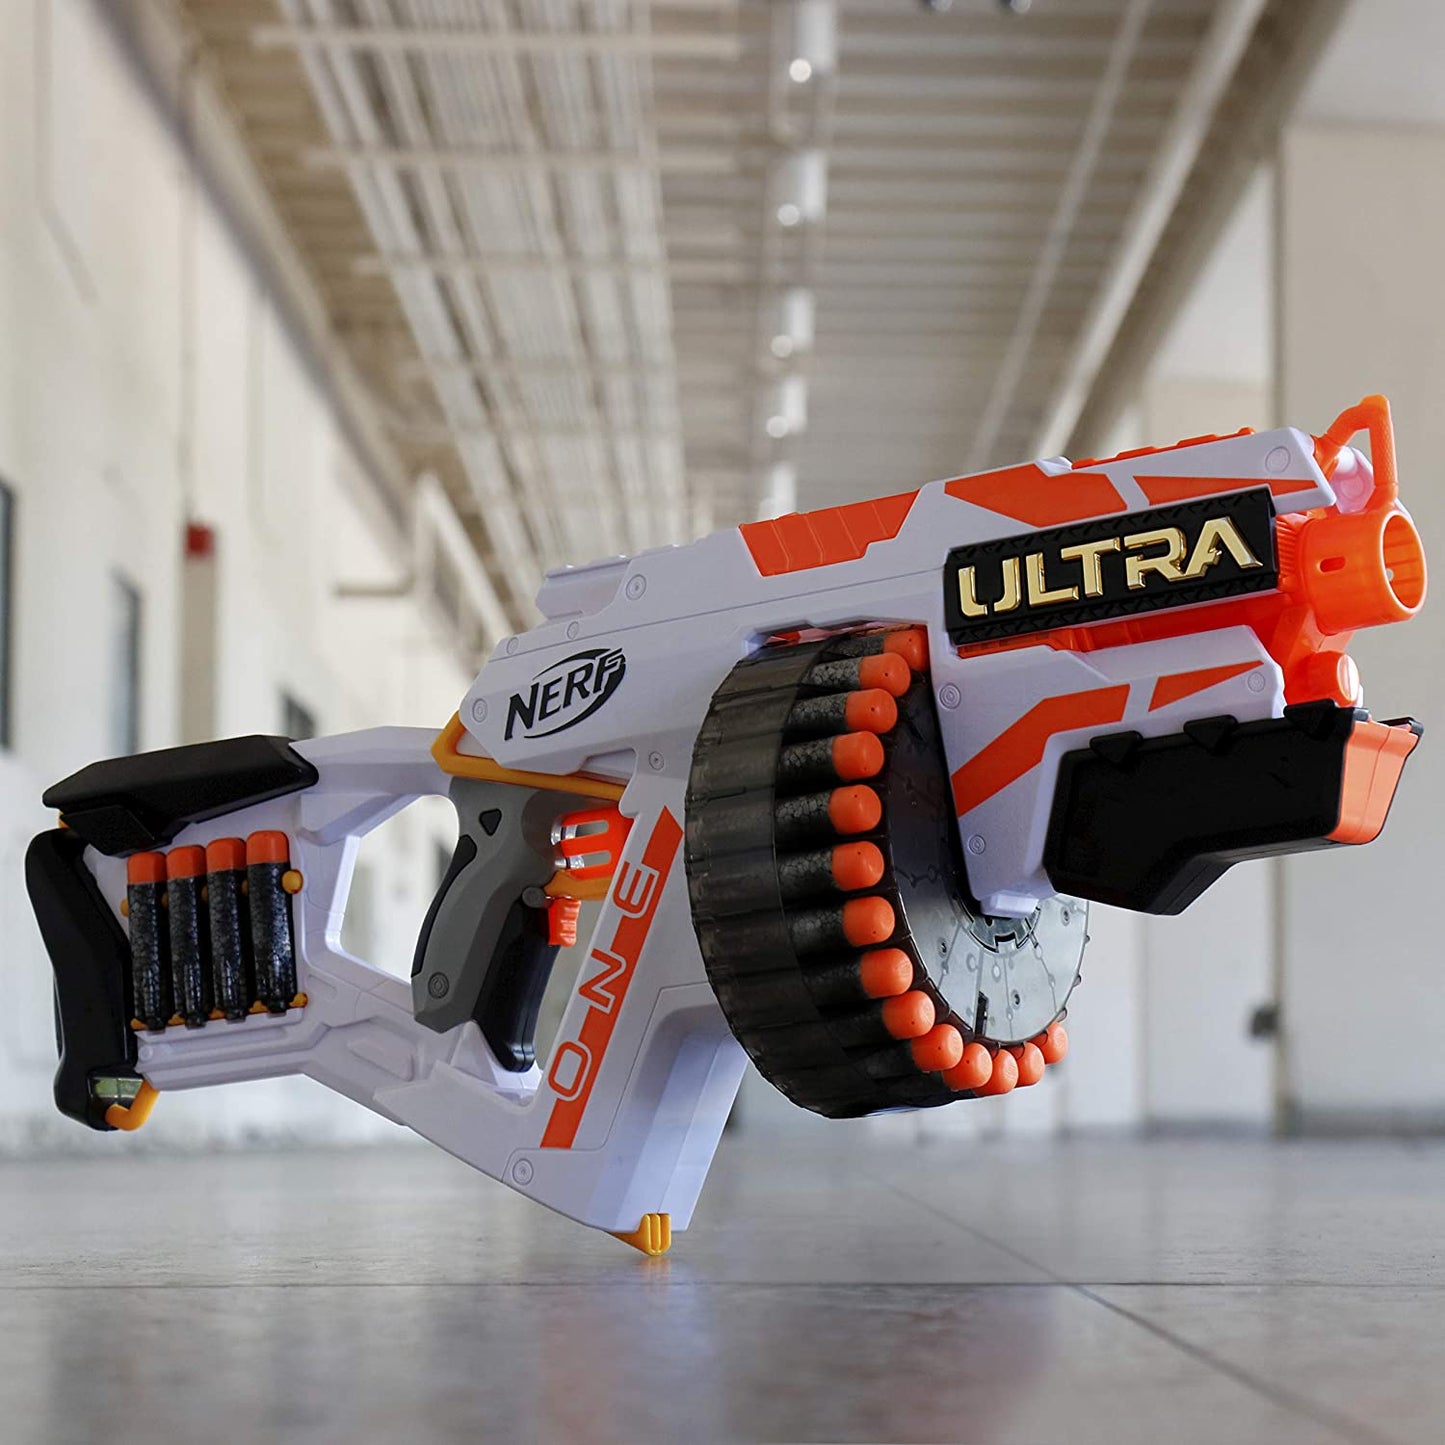 Nerf Ultra One and 25 Official Nerf Ultra Darts